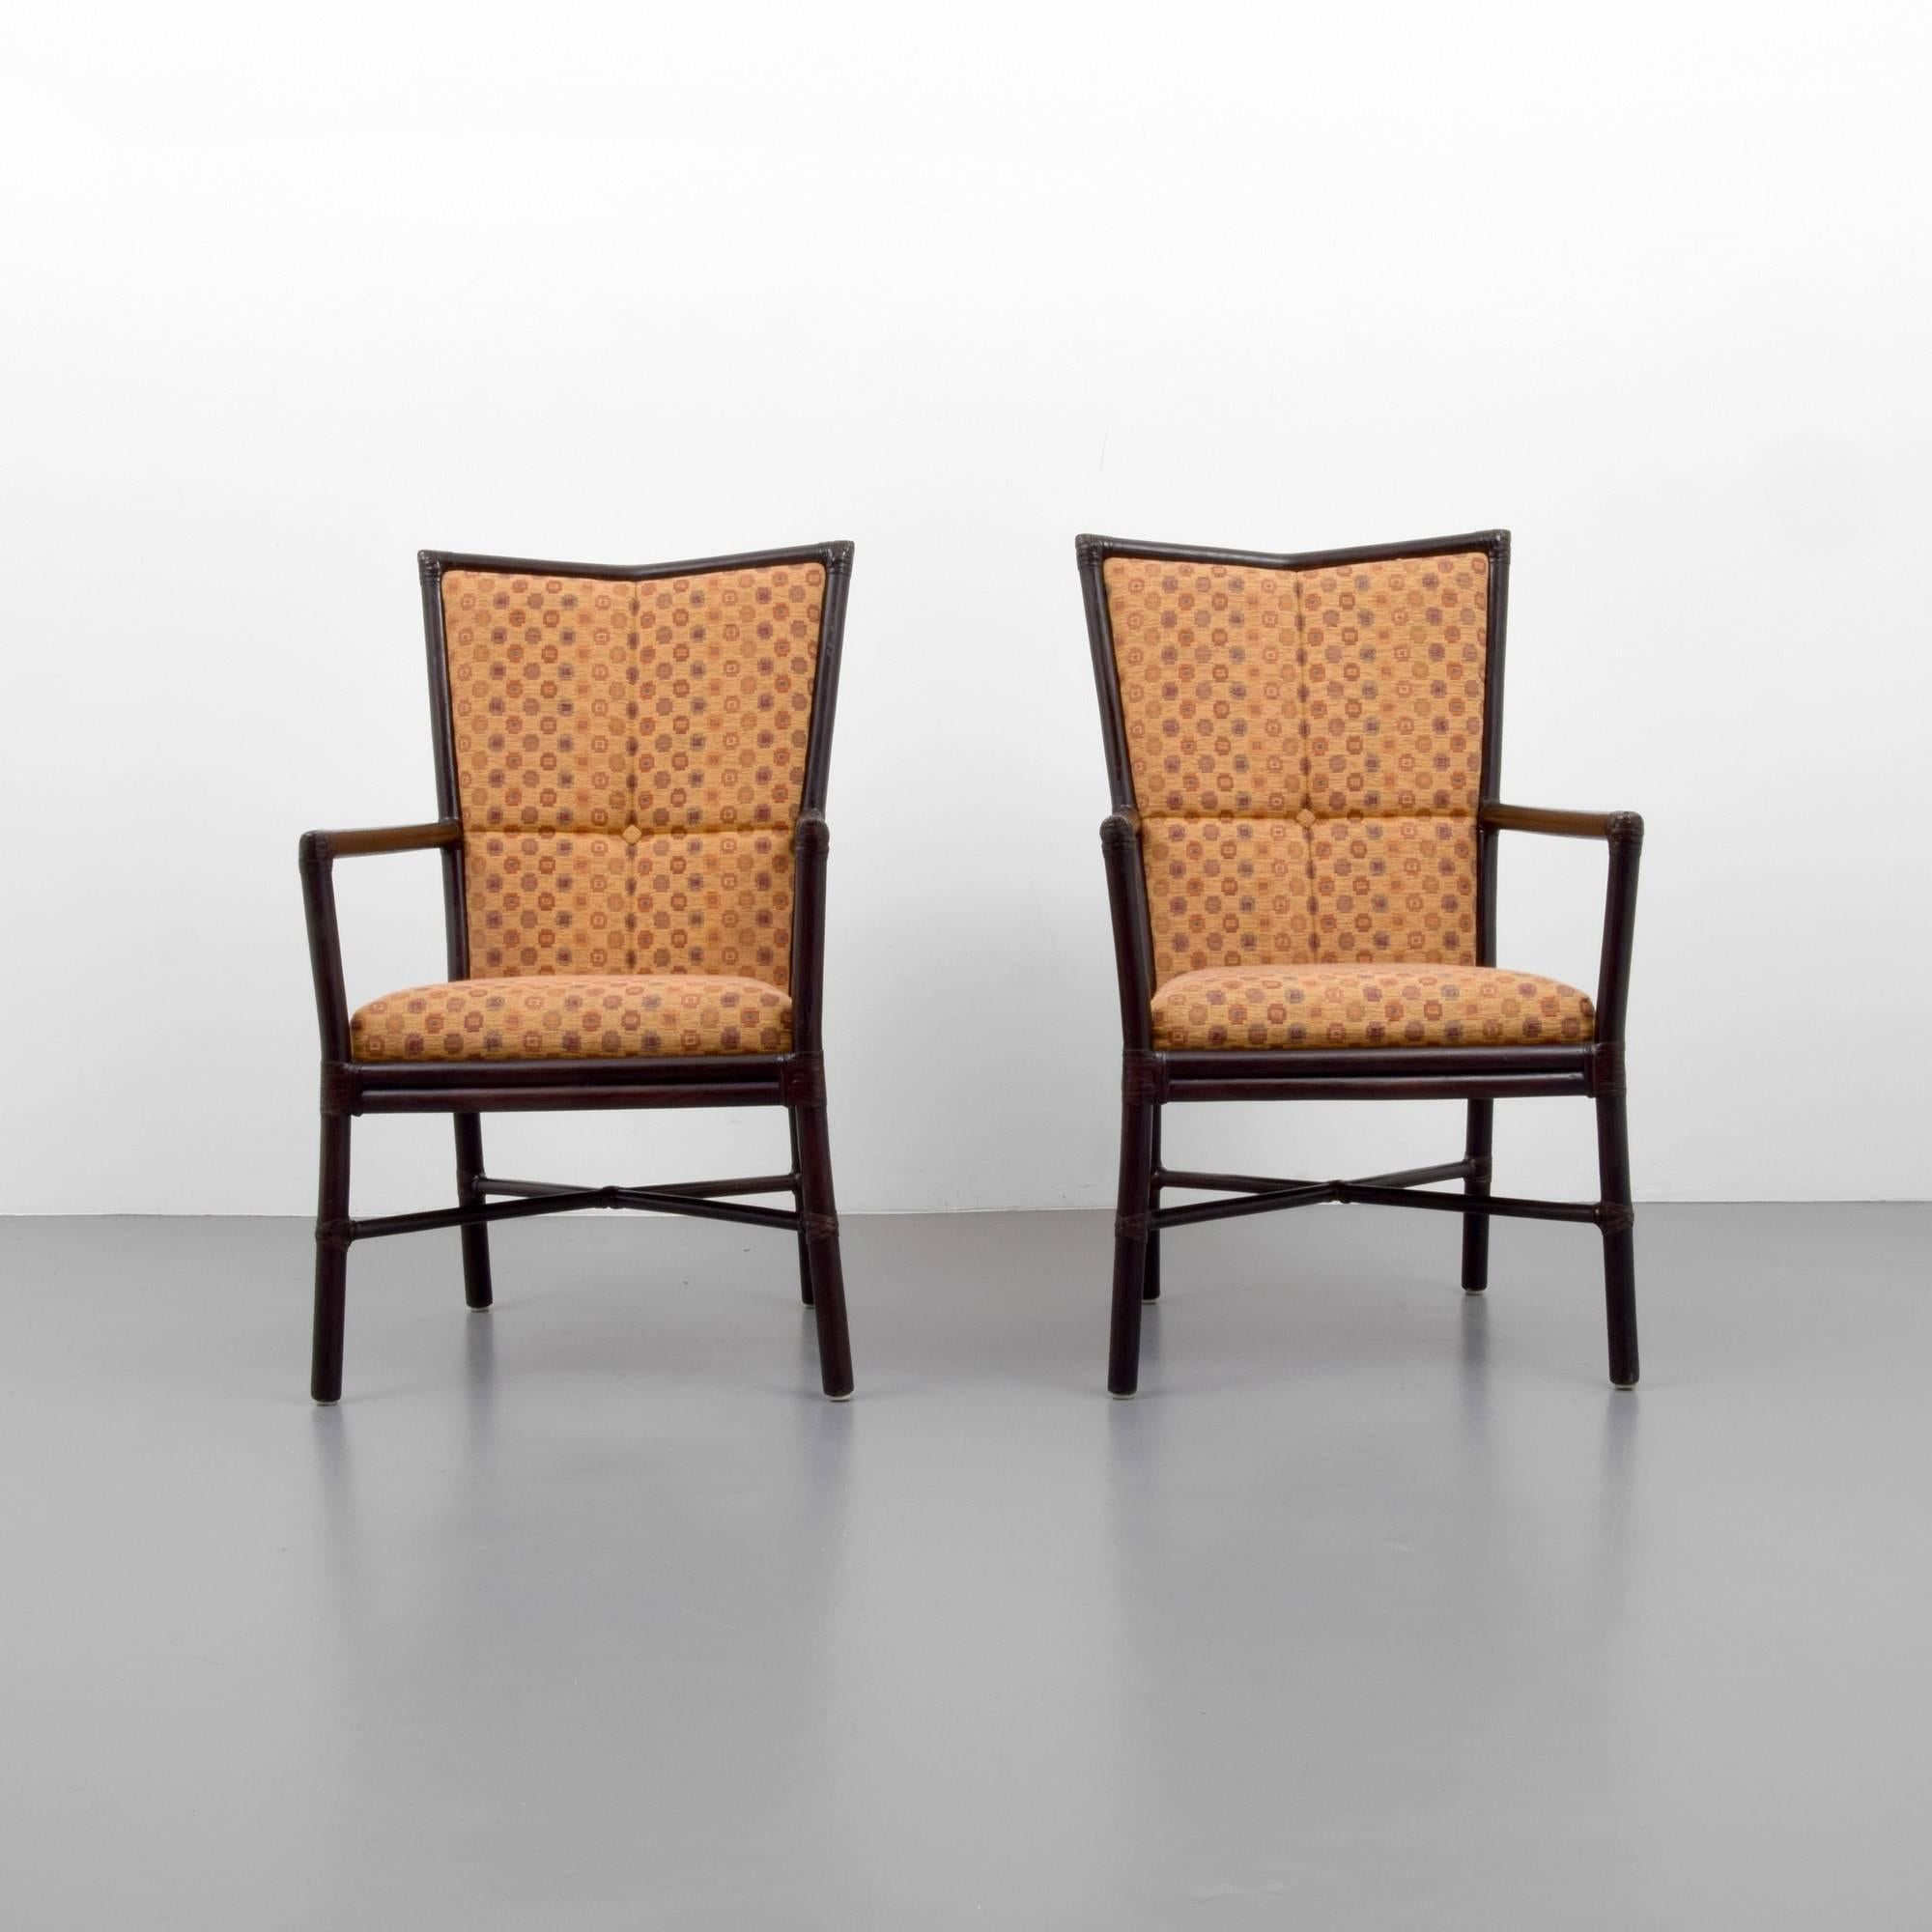 Pair of high back lounge chairs by Orlando Diaz-Azcuy for McGuire.